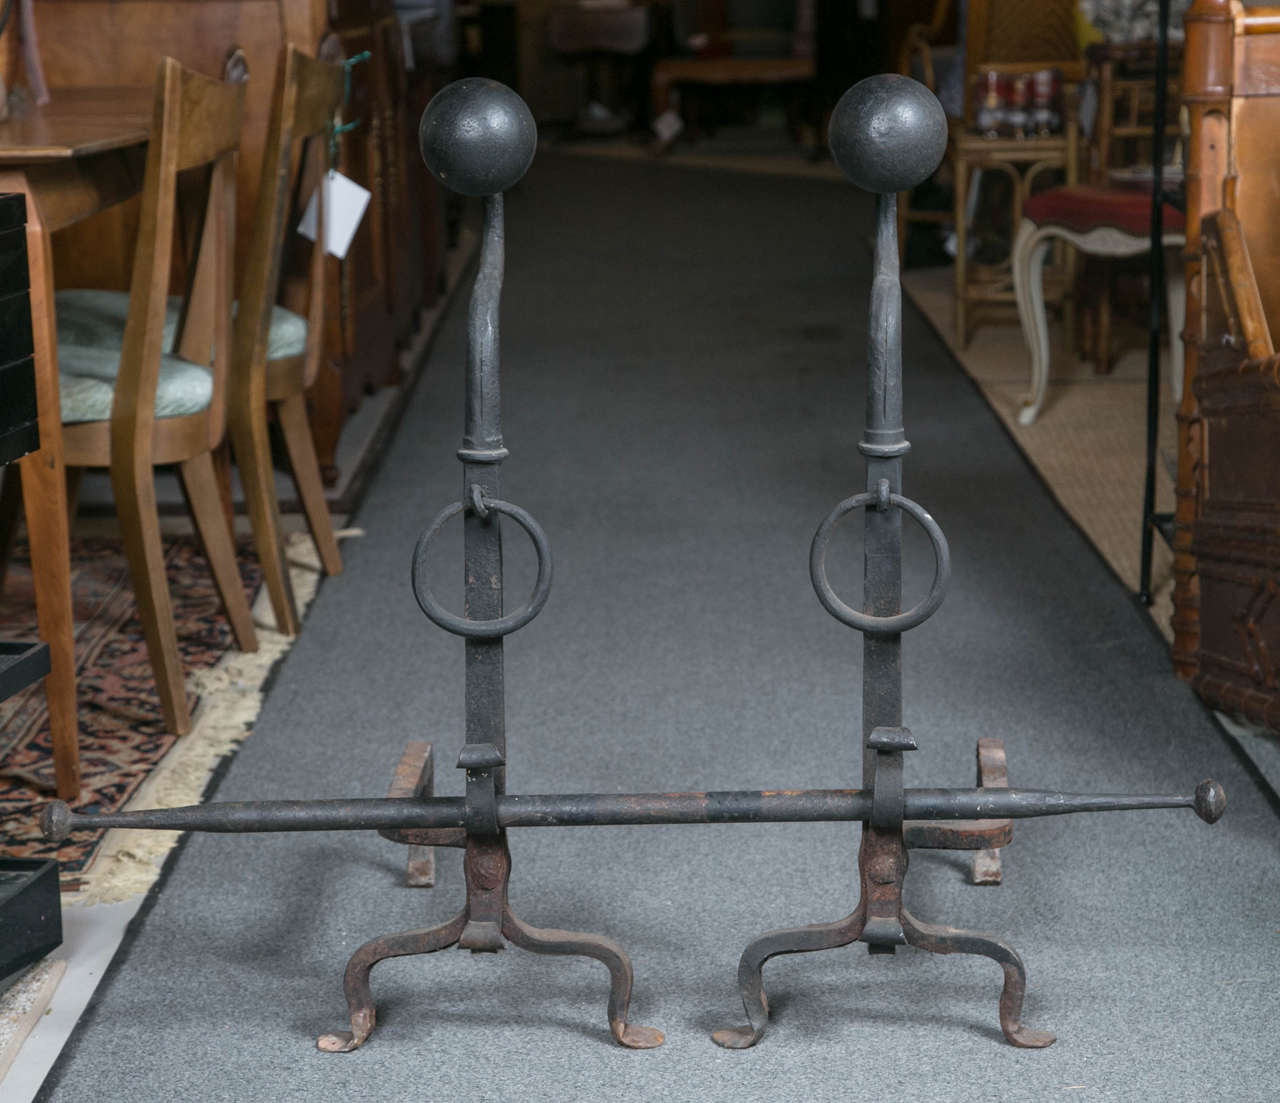 Pair of oversized iron andirons with large ball tops and iron crossbar measuring 39